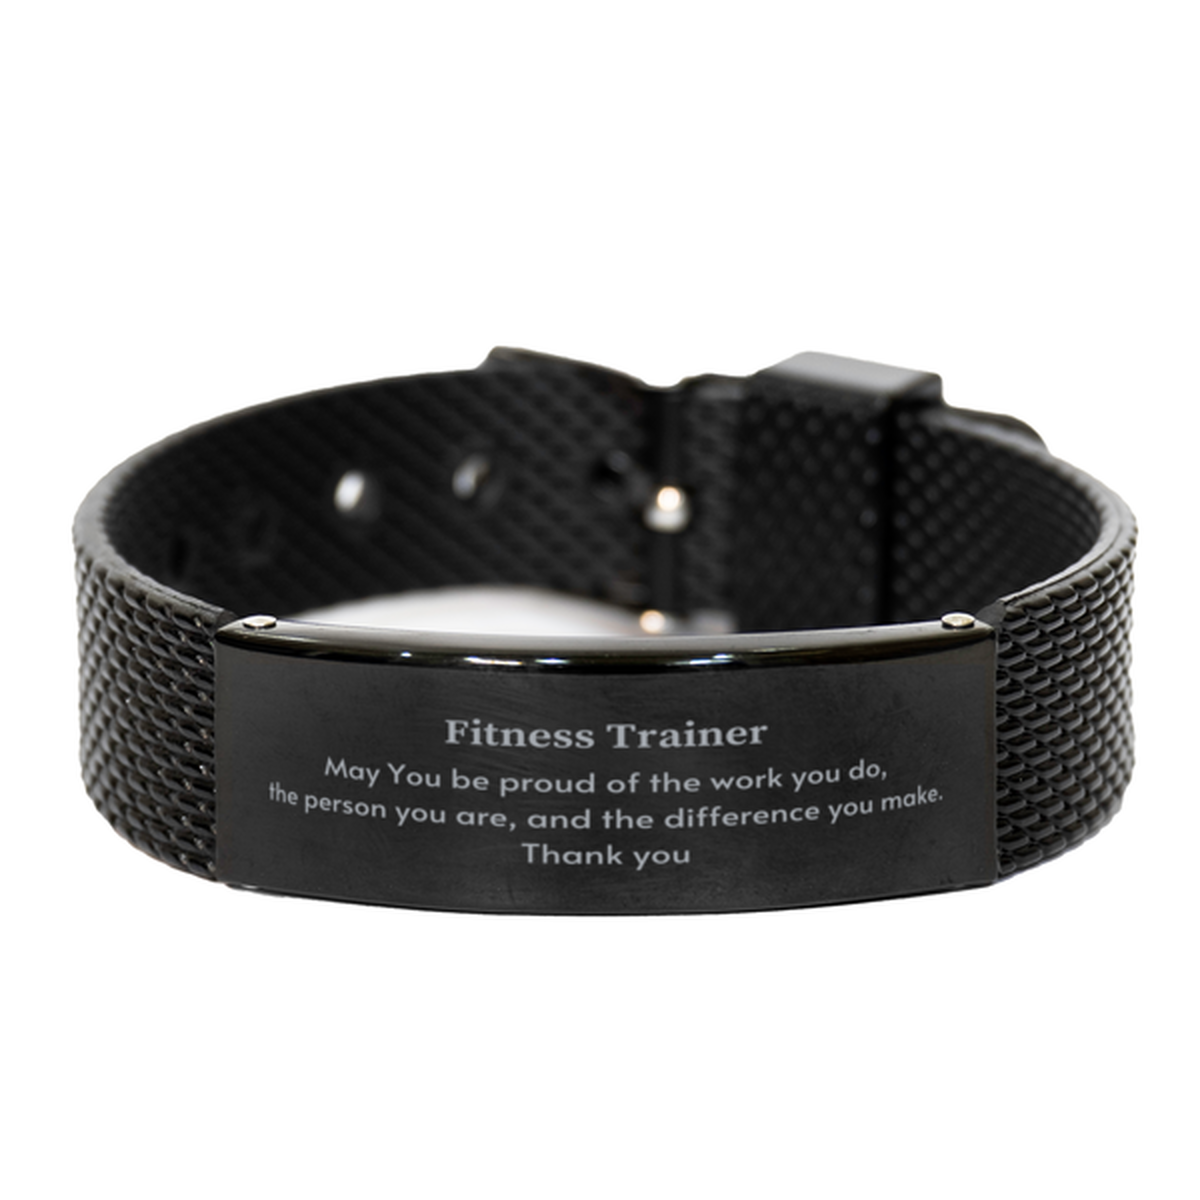 Heartwarming Black Shark Mesh Bracelet Retirement Coworkers Gifts for Fitness Trainer, Fitness Trainer May You be proud of the work you do, the person you are Gifts for Boss Men Women Friends